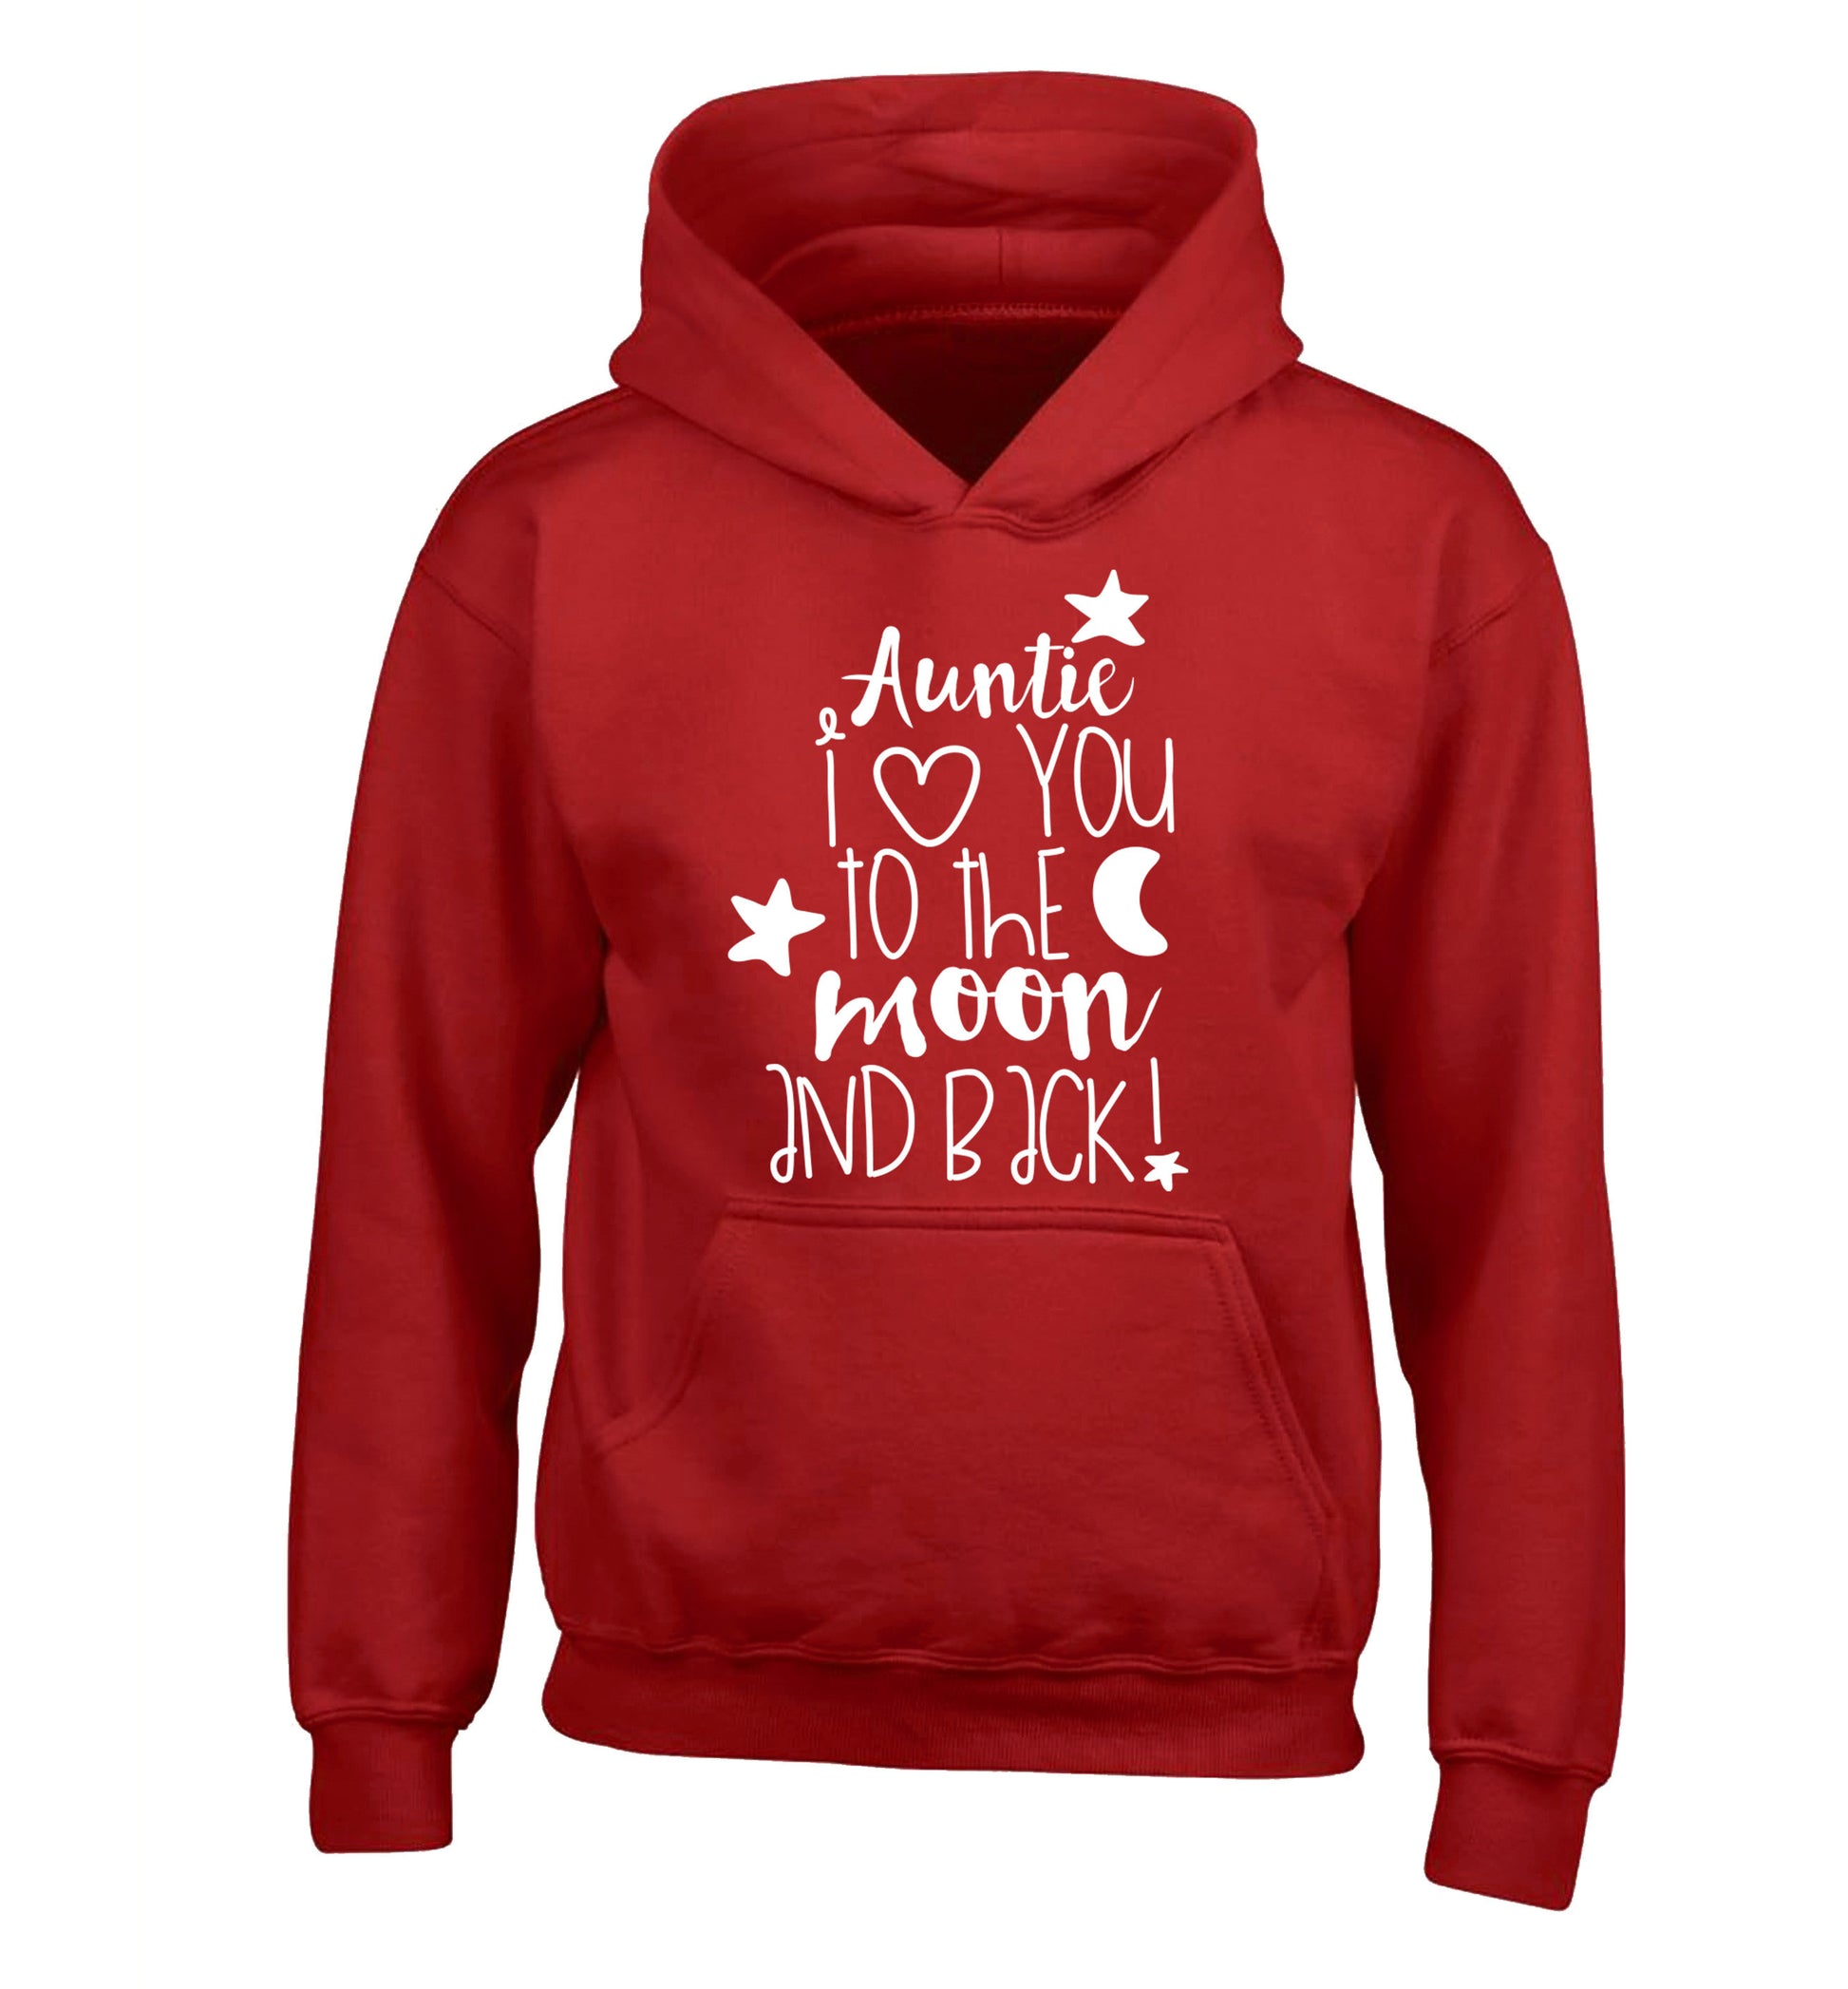 Auntie I love you to the moon and back children's red hoodie 12-14 Years